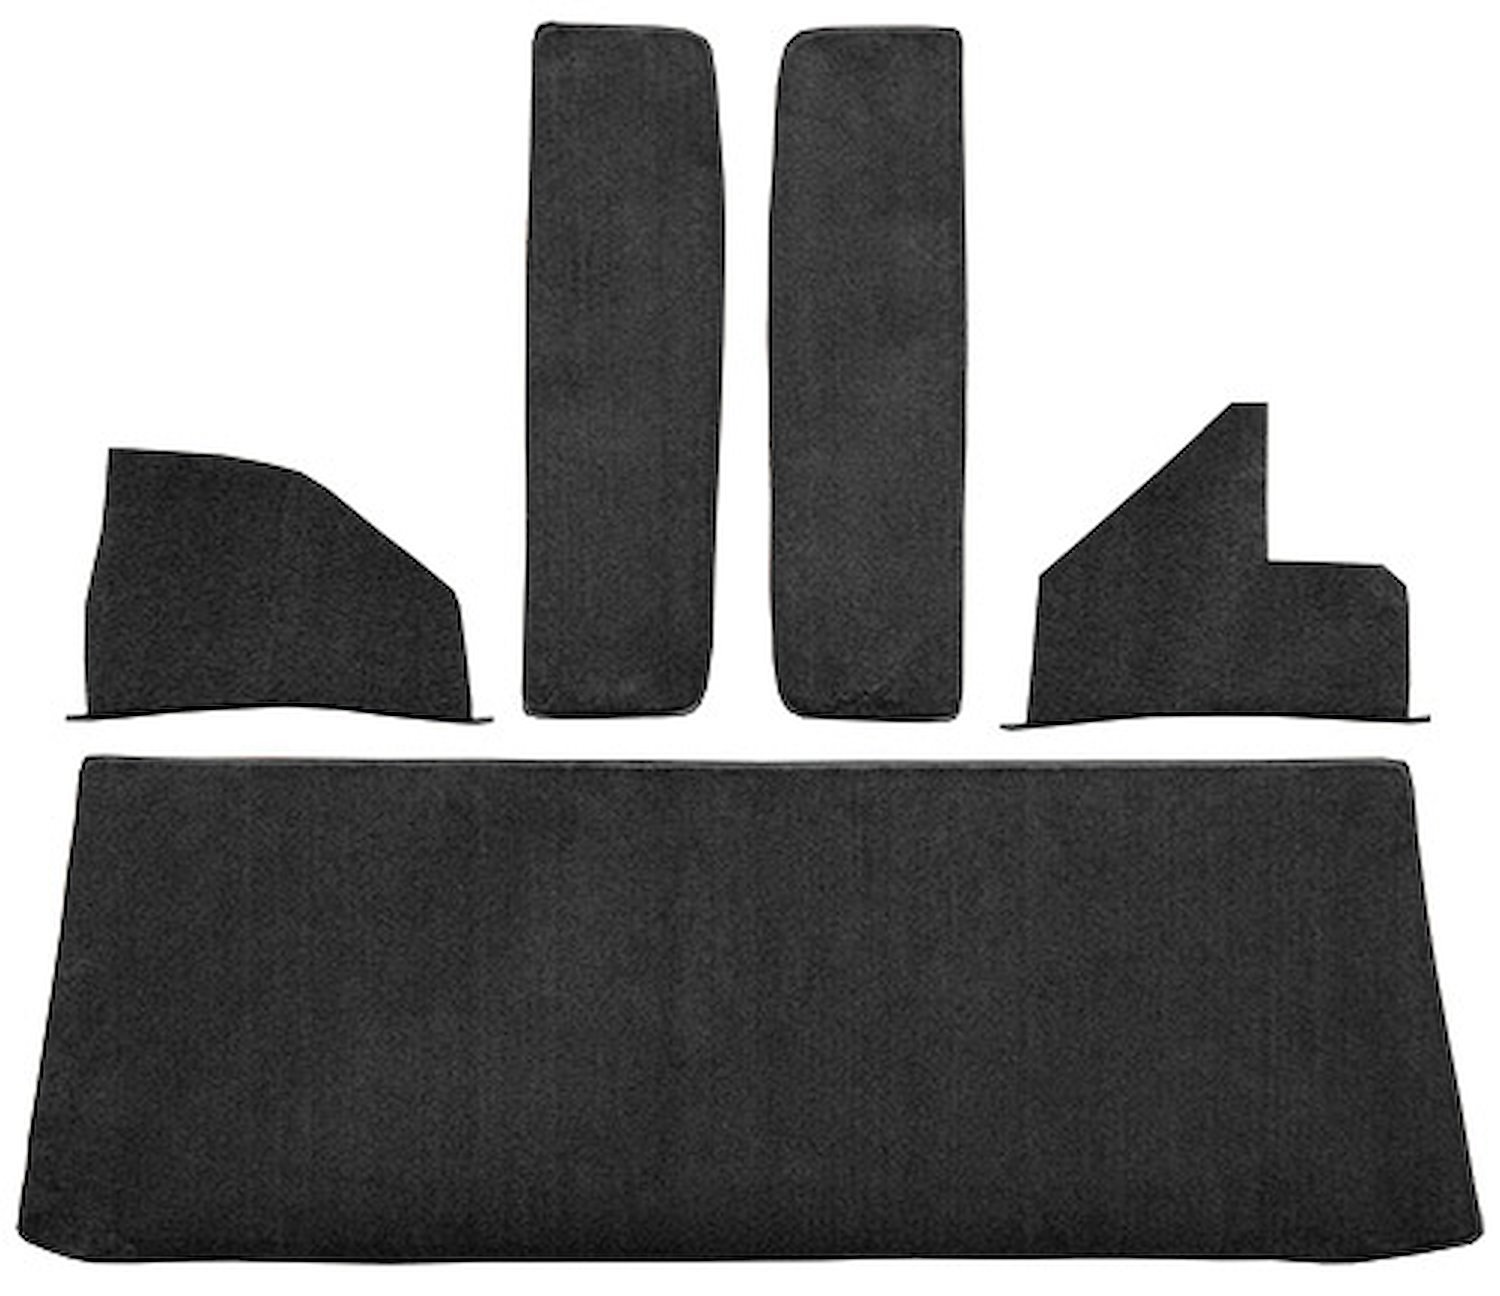 Molded Loop Accessory Carpet for 1959 GM Trucks